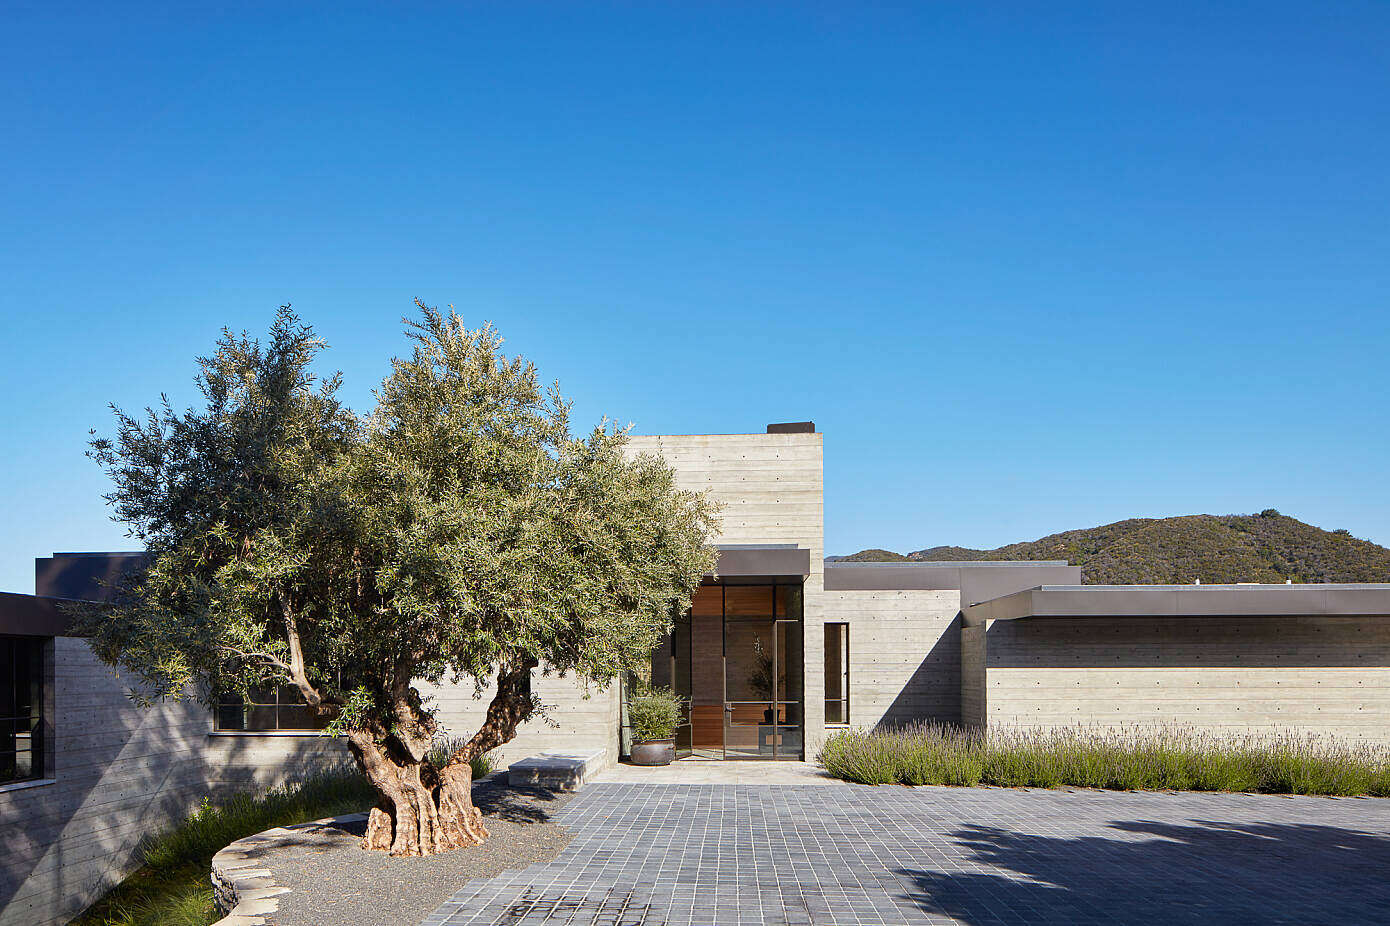 Sapire Residence by Abramson Architects